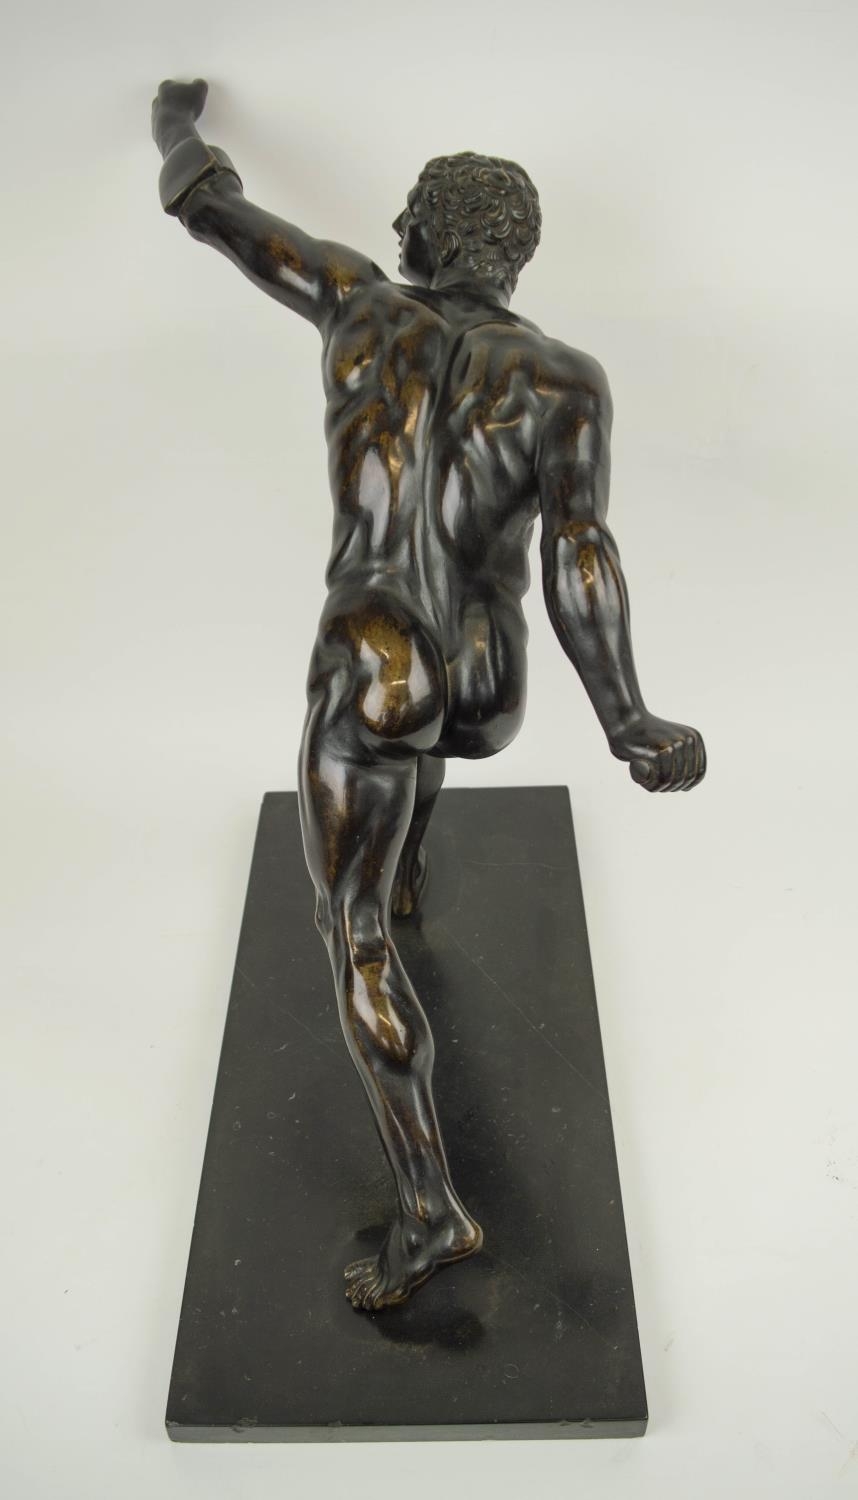 BRONZE SCULPTURE, 'The Borghese Gladiator' 19th century Italian, after the original marble held in - Image 5 of 13